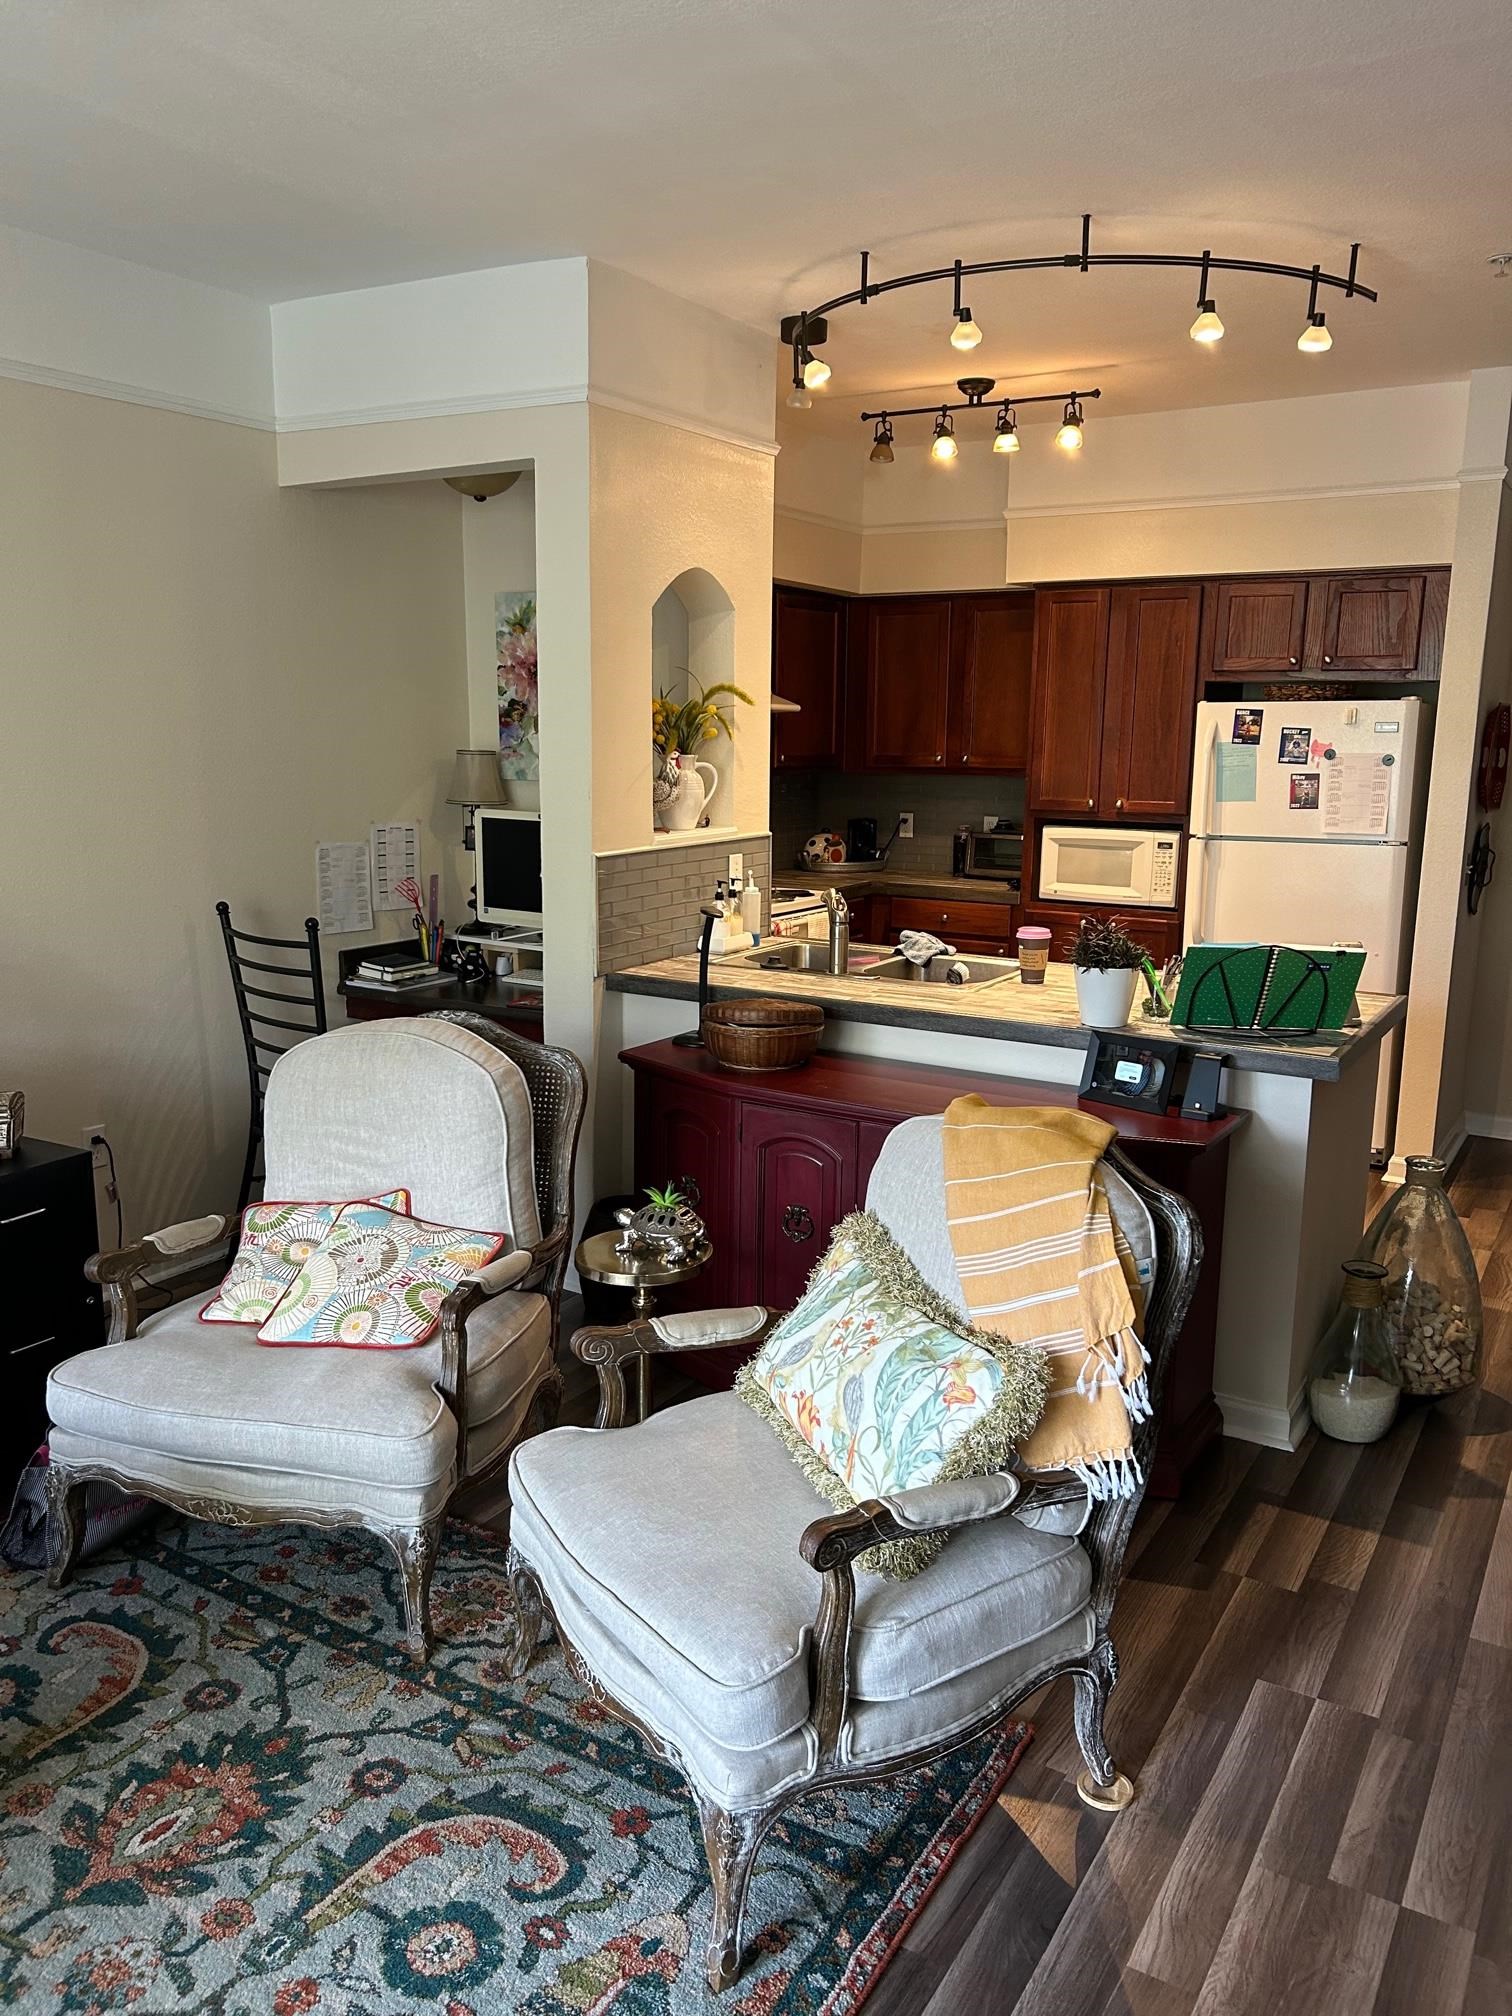 2801 Chancellorsville Dr Unit 424 Drive,TALLAHASSEE,Florida 32312,1 Bedroom Bedrooms,1 BathroomBathrooms,Condo,2801 Chancellorsville Dr Unit 424 Drive,364411